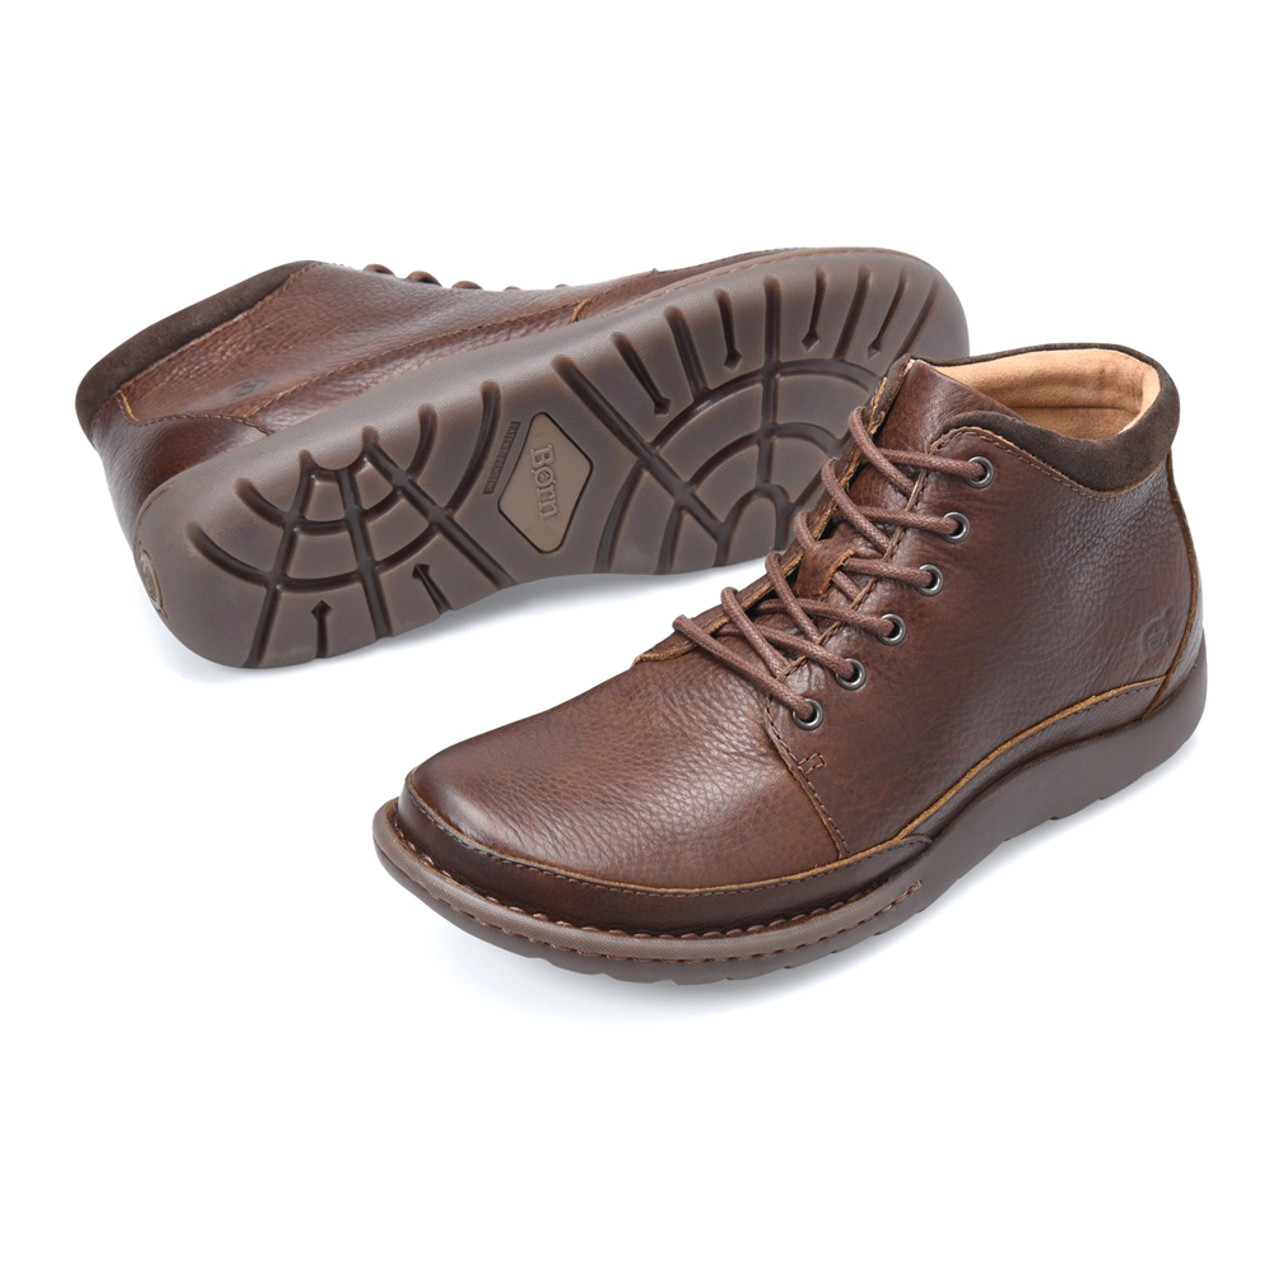 born handcrafted footwear shoes